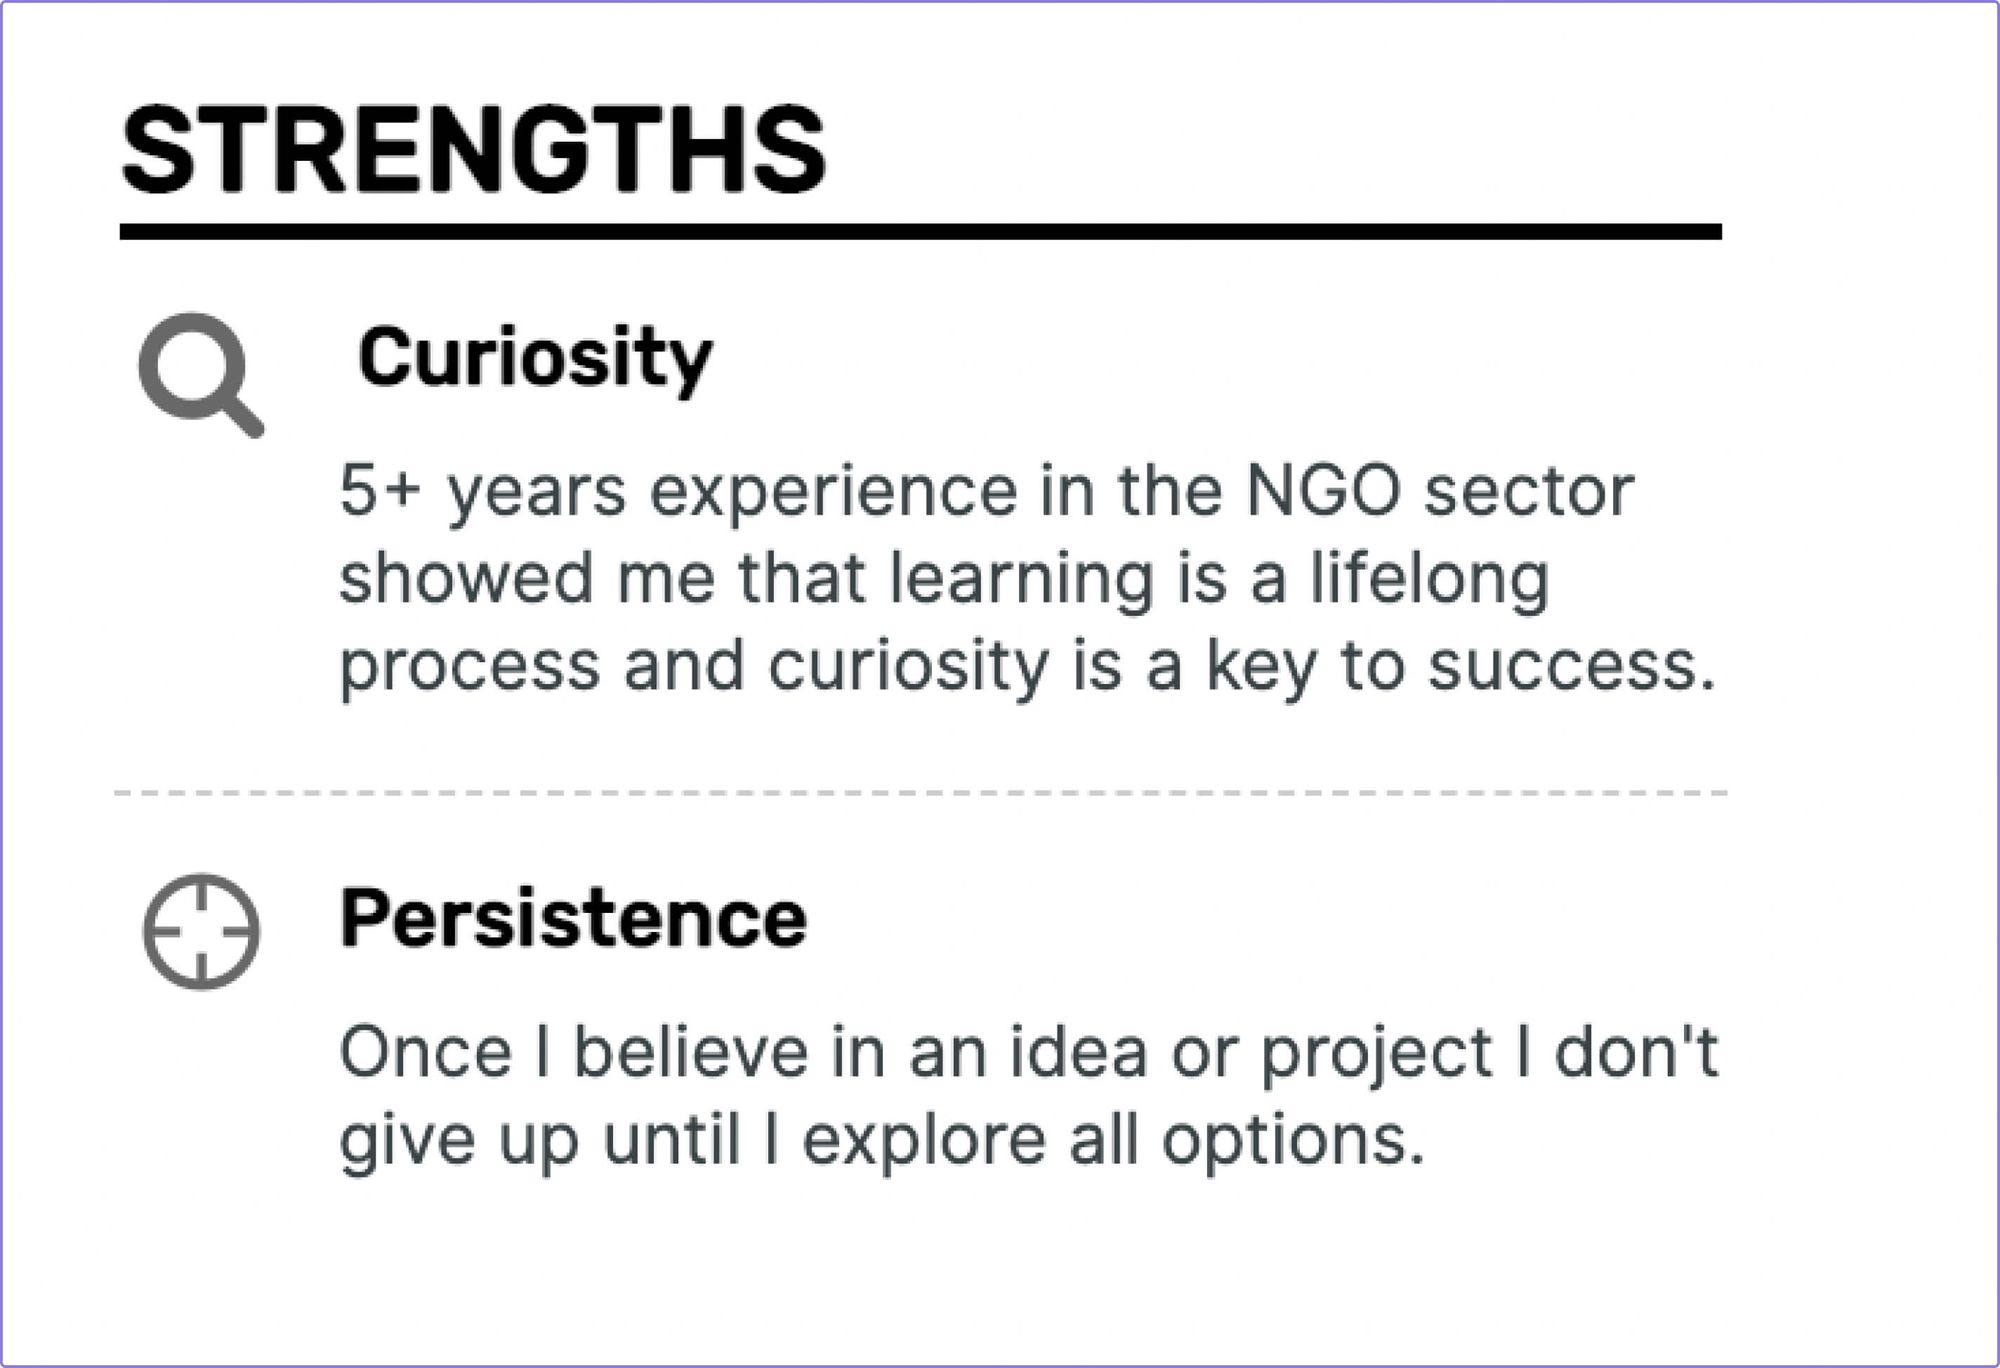 how to write a strengths section on your resume